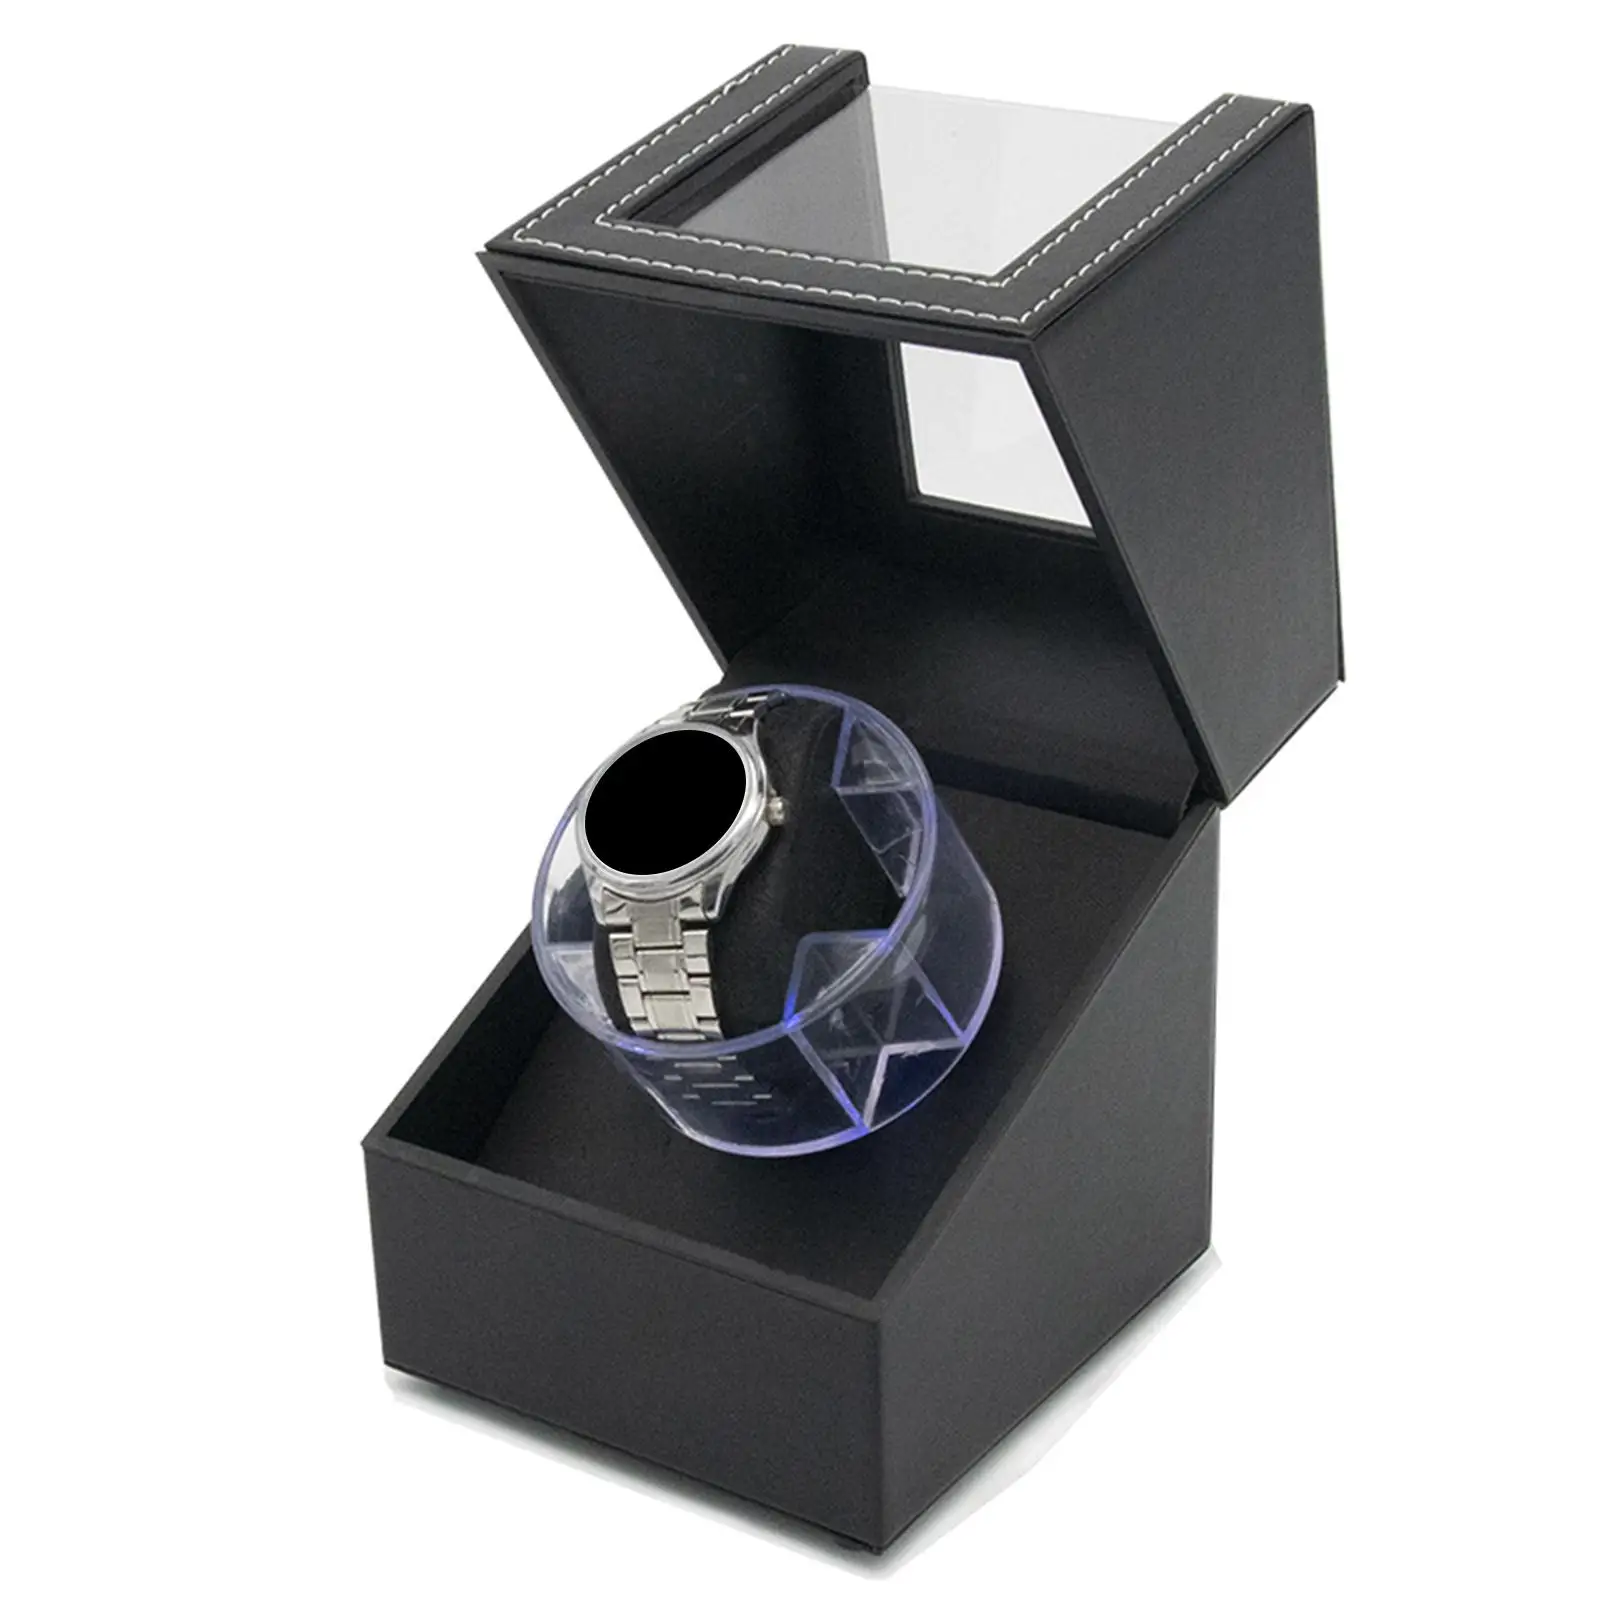 Automatic Watch Winder Collector Display Box with Quiet Motor USB Powered for Holiday Gifts